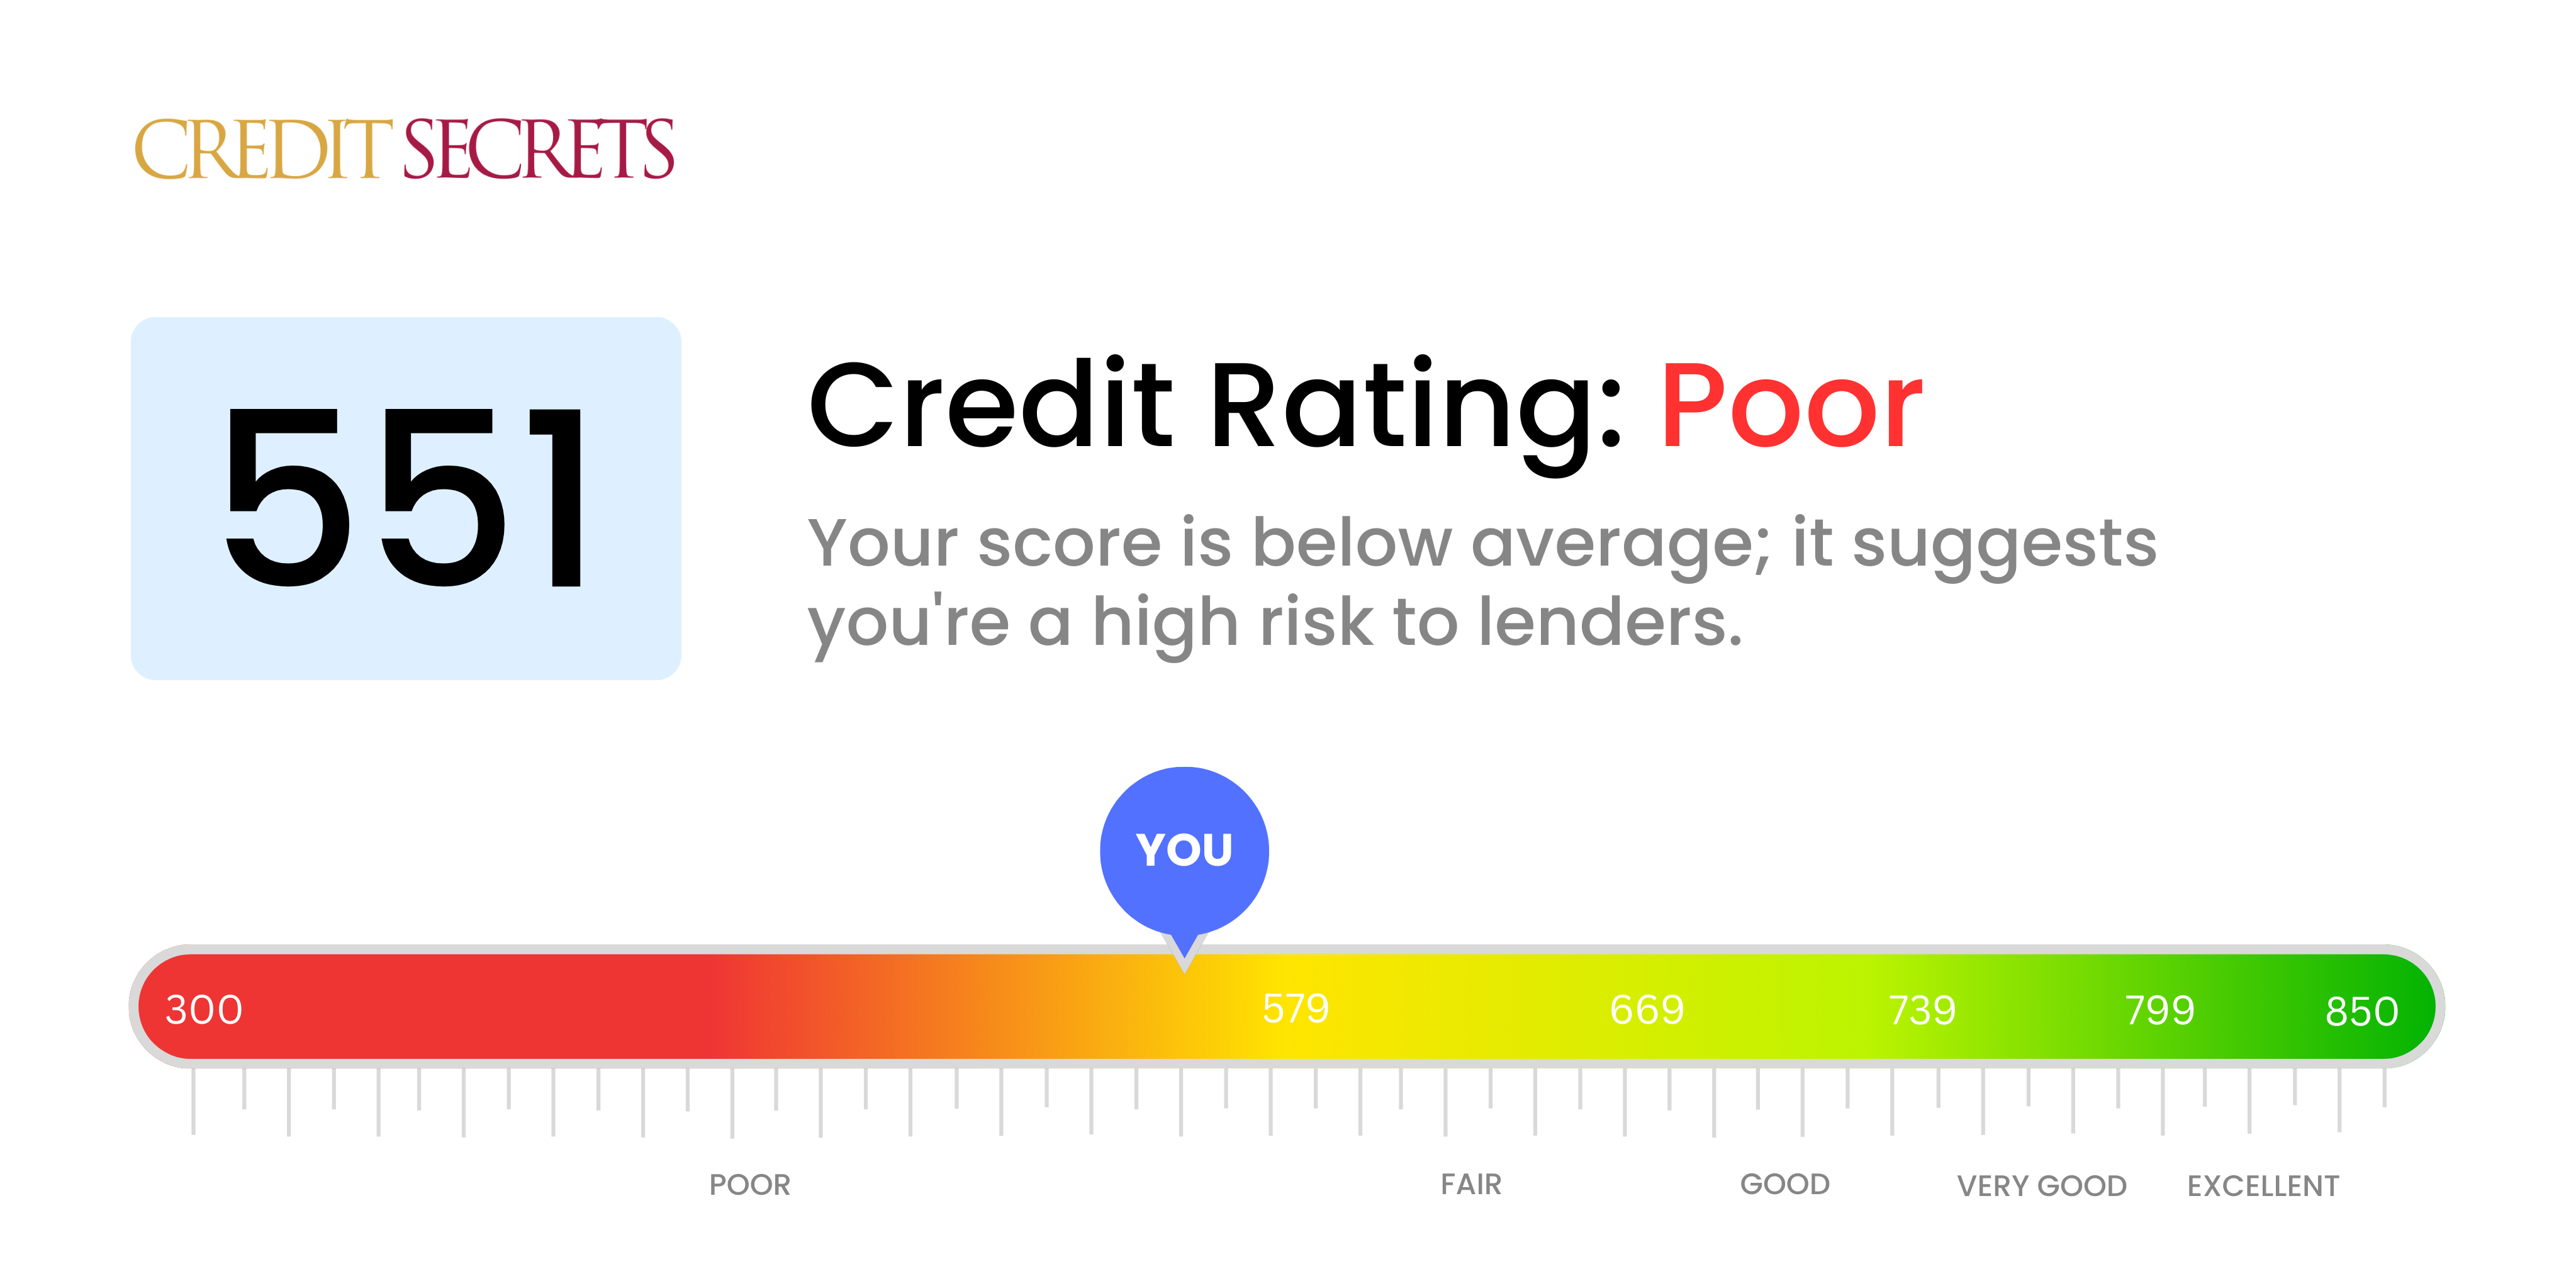 Is 551 a good credit score?